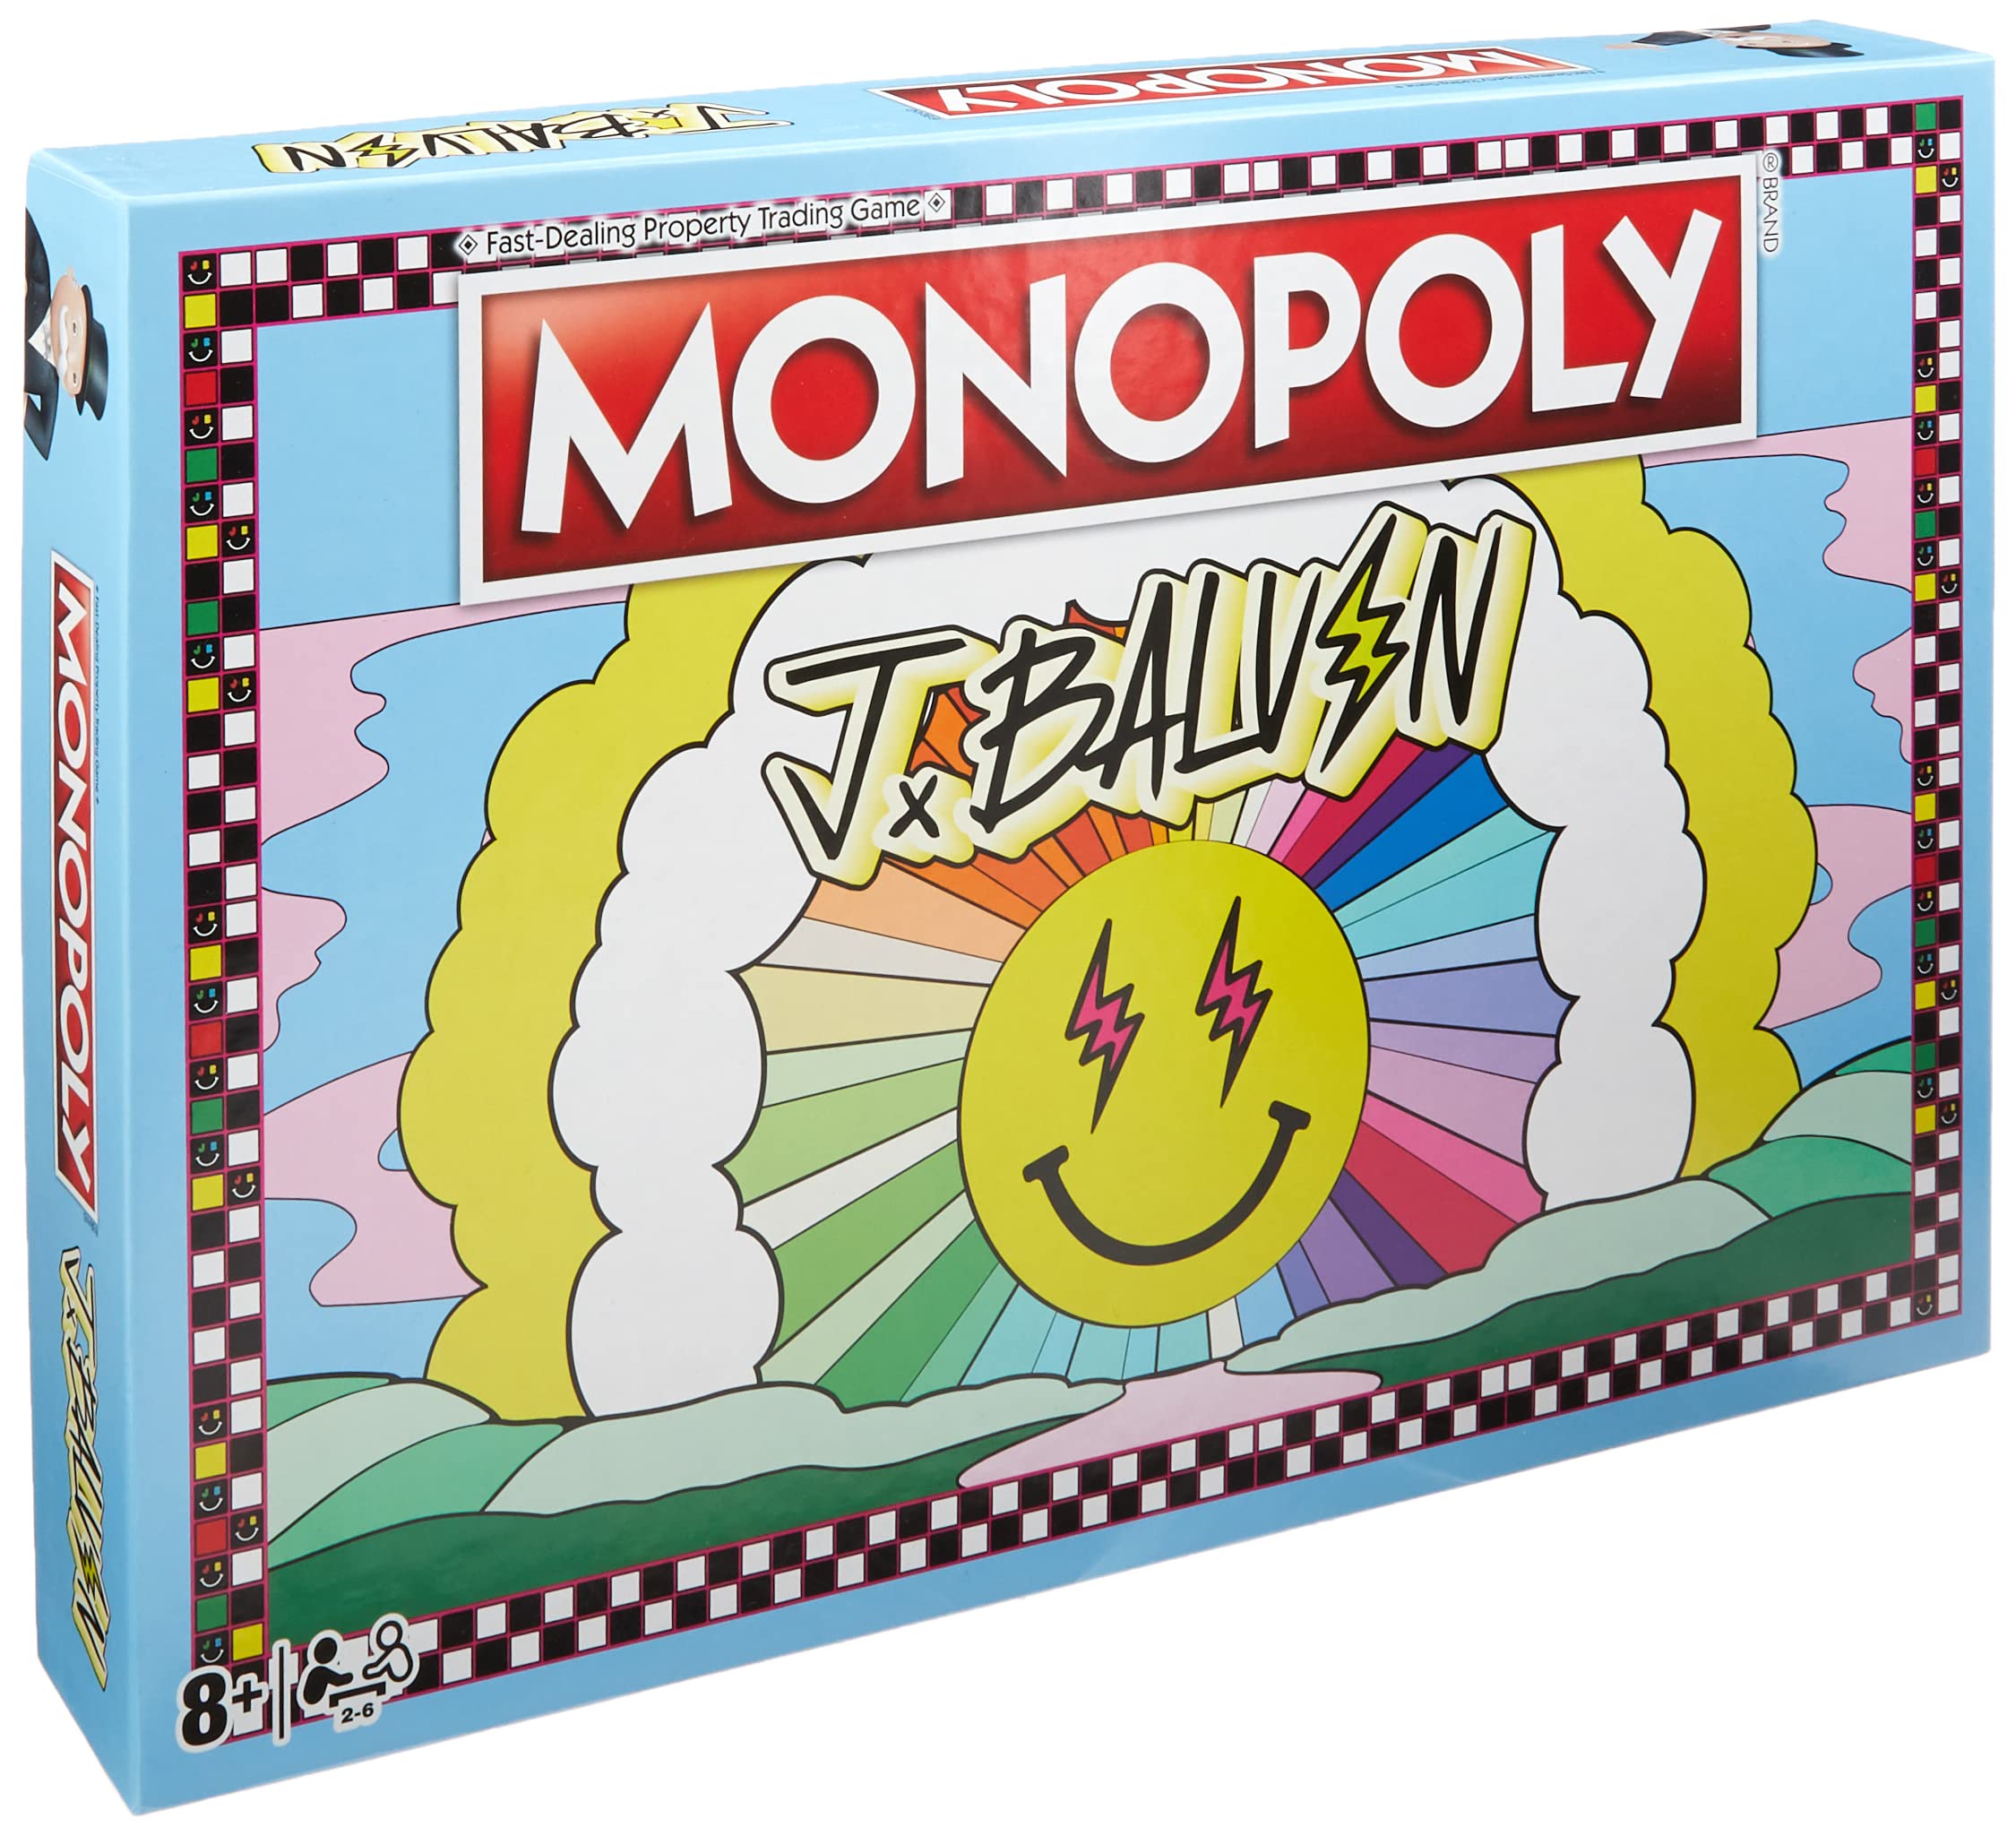 Monopoly Game J Balvin Limited Edition $6.37 + Free Shipping w/ Prime or on orders over $35